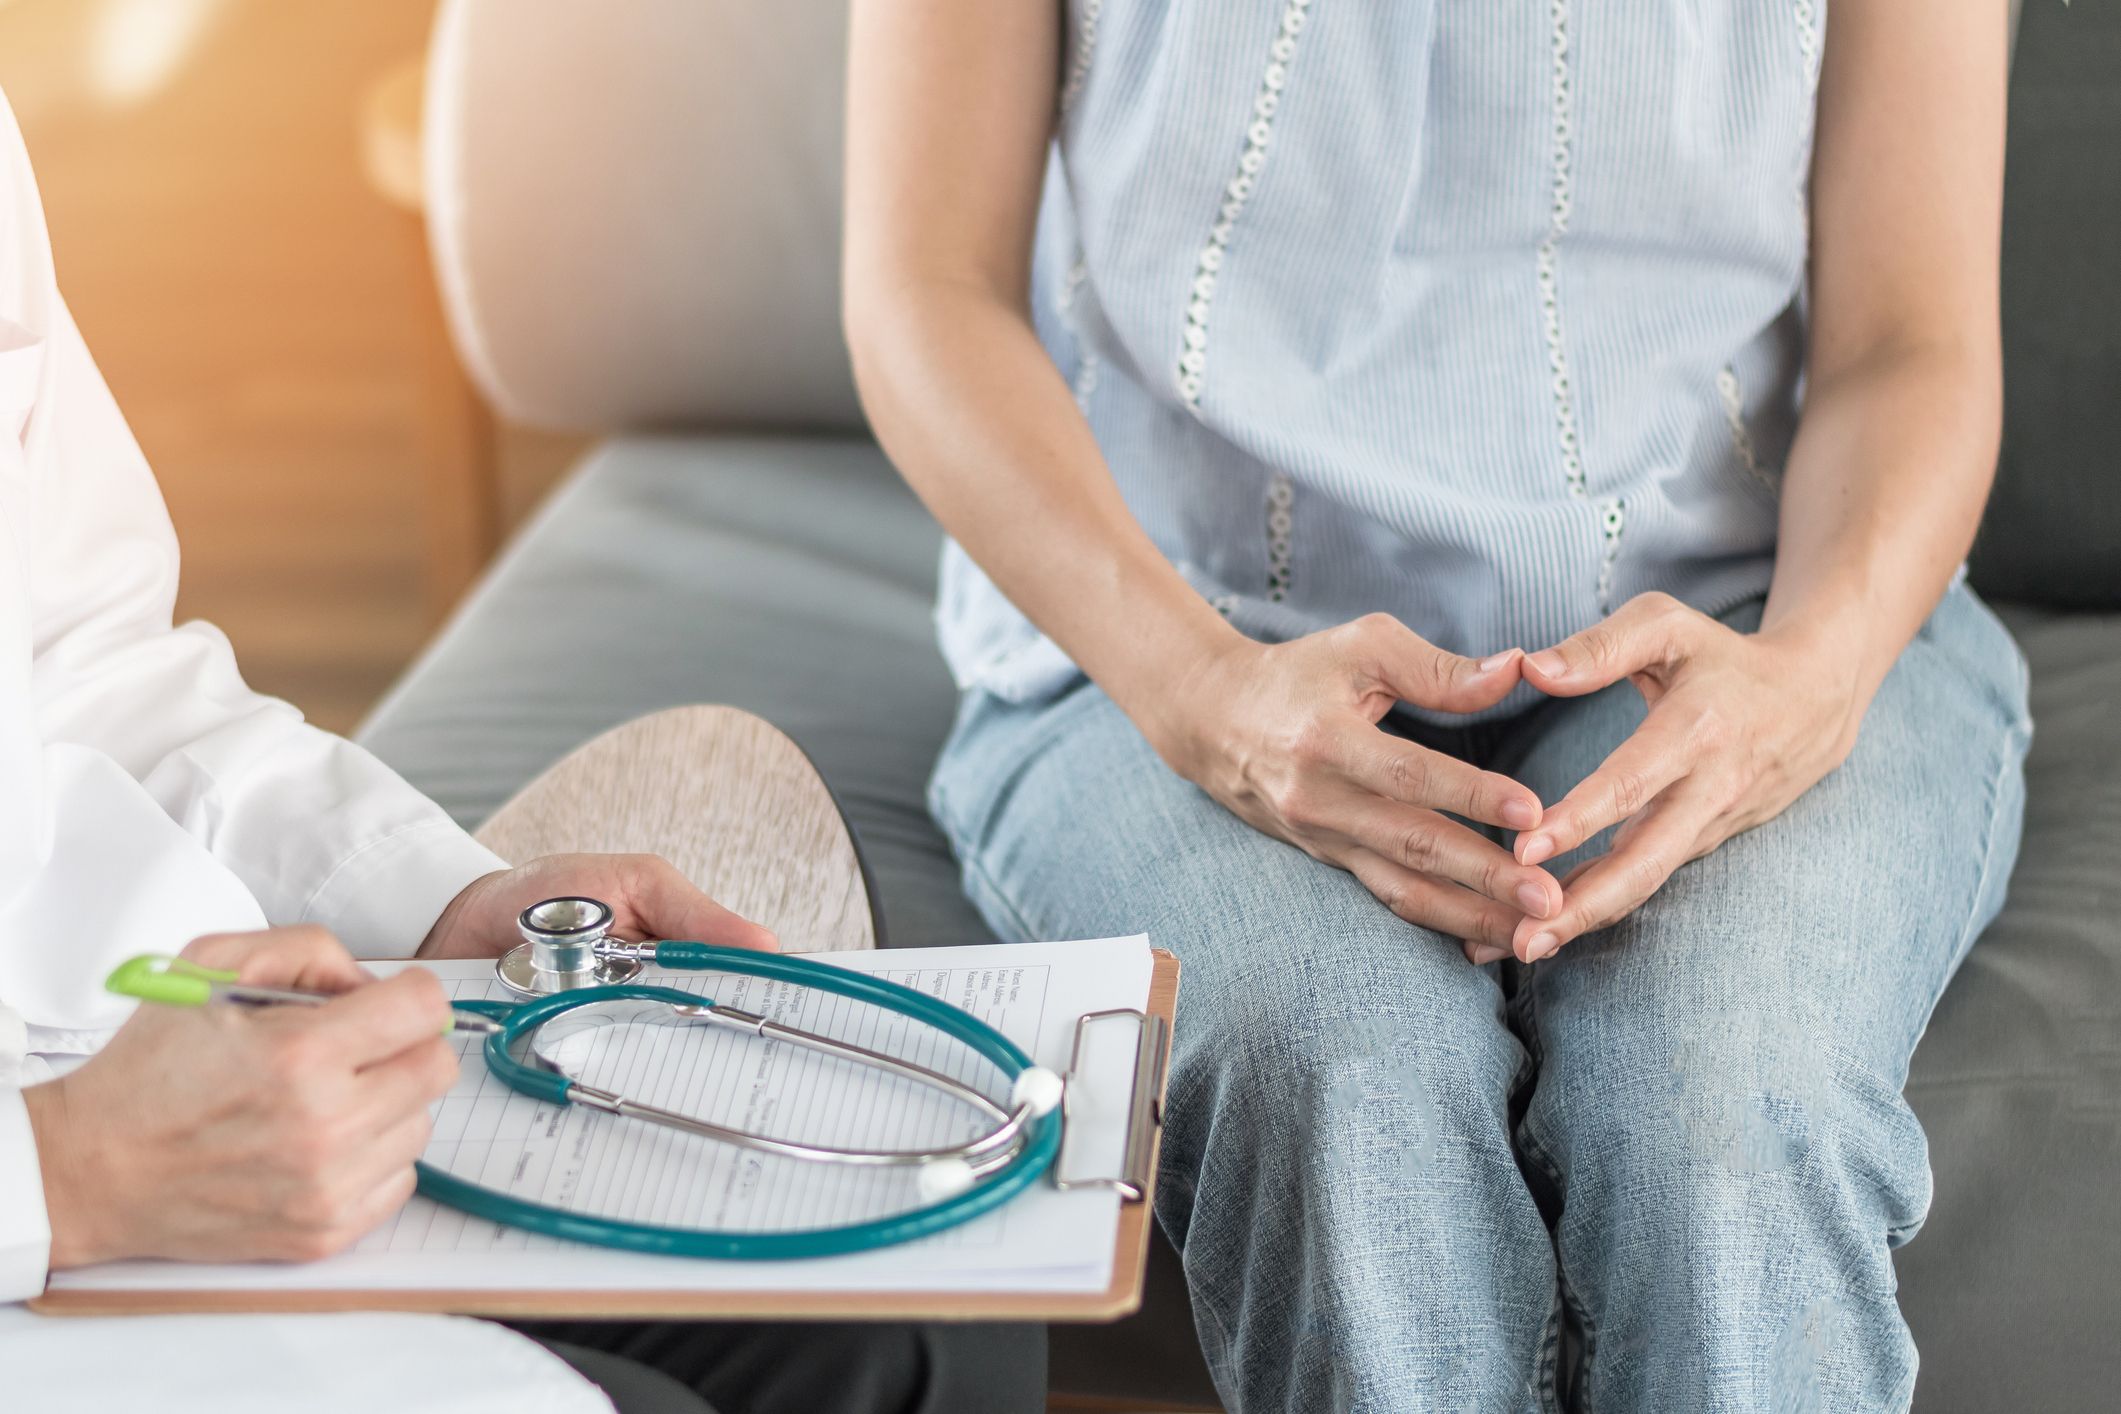  “If you’re perimenopausal, meaning if you’re having some irregularity of periods or having nights with hot flashes, new sleep problems, new migraines, increased cramps, shorter cycles, this is part of a process that’s perfectly normal,” says Dr. Jerilynn Prior. GETTY